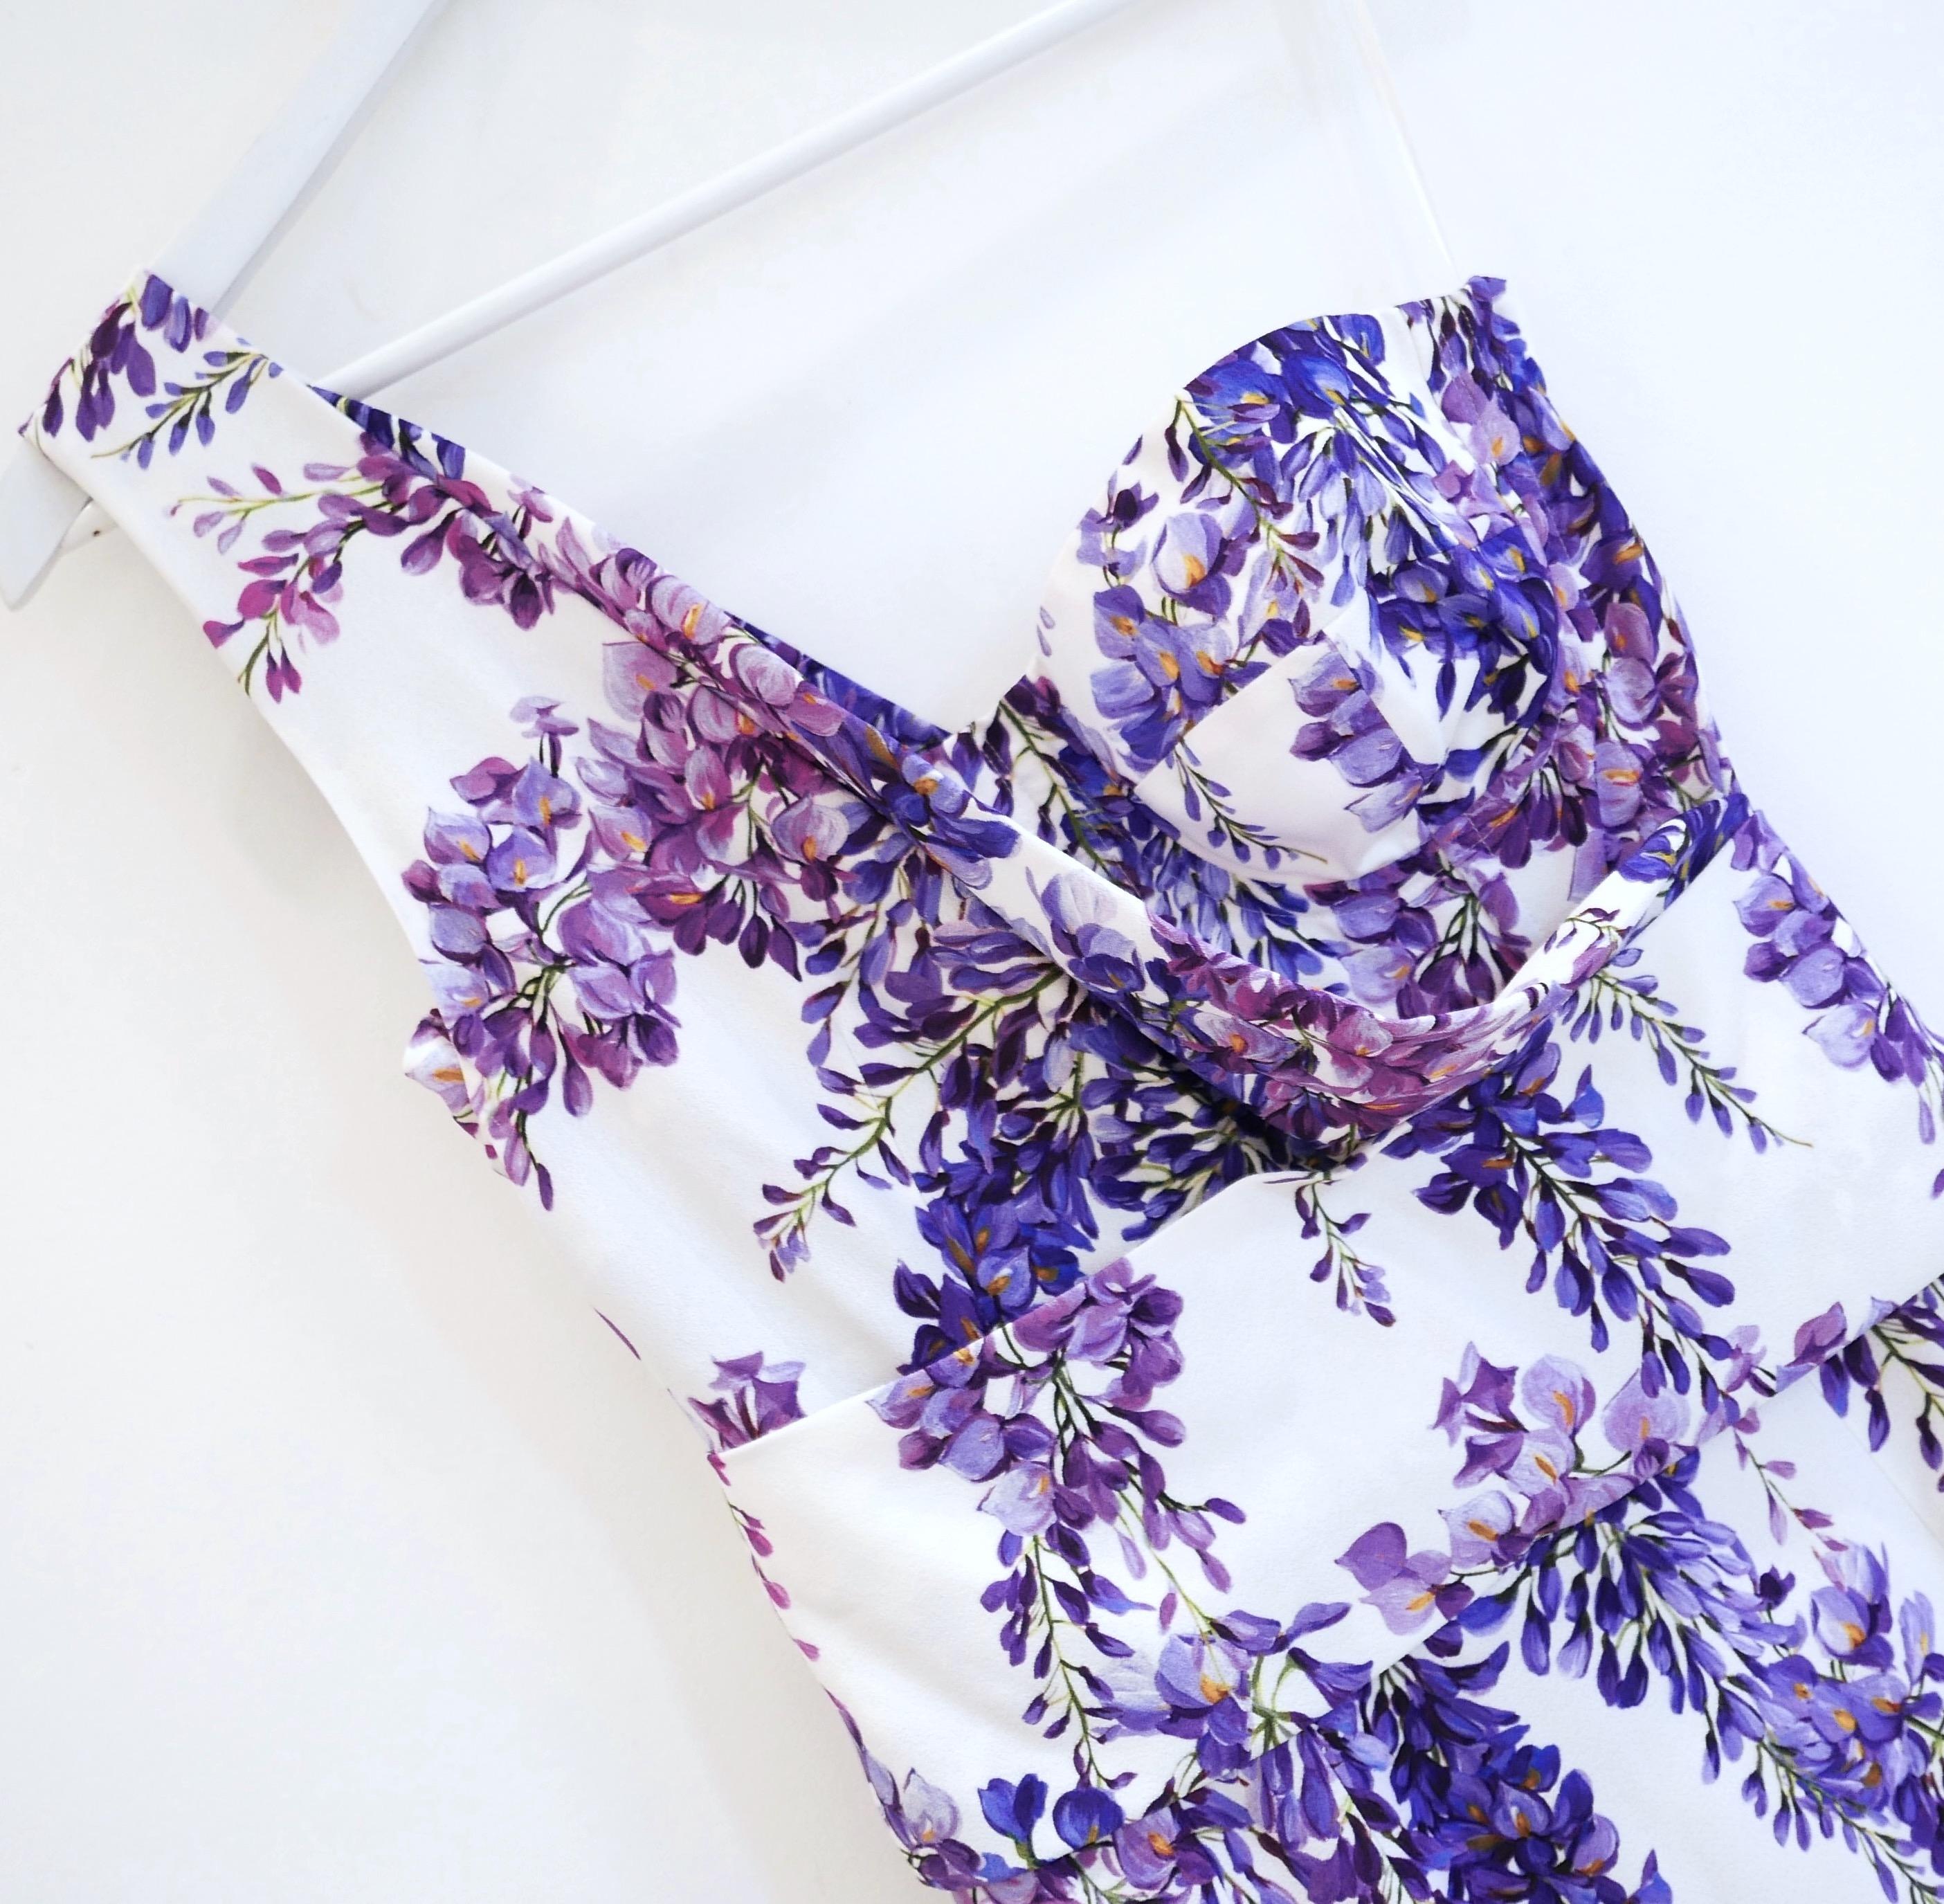 Gorgeous, ultra feminine Dolce & Gabbana lilac print bustier dress. bought for £1950 and new with tags. Made from soft viscose/elastane crepe with a vibrant purple and lilac print,  it has Dolce’s signature bustier cut with internal boning and